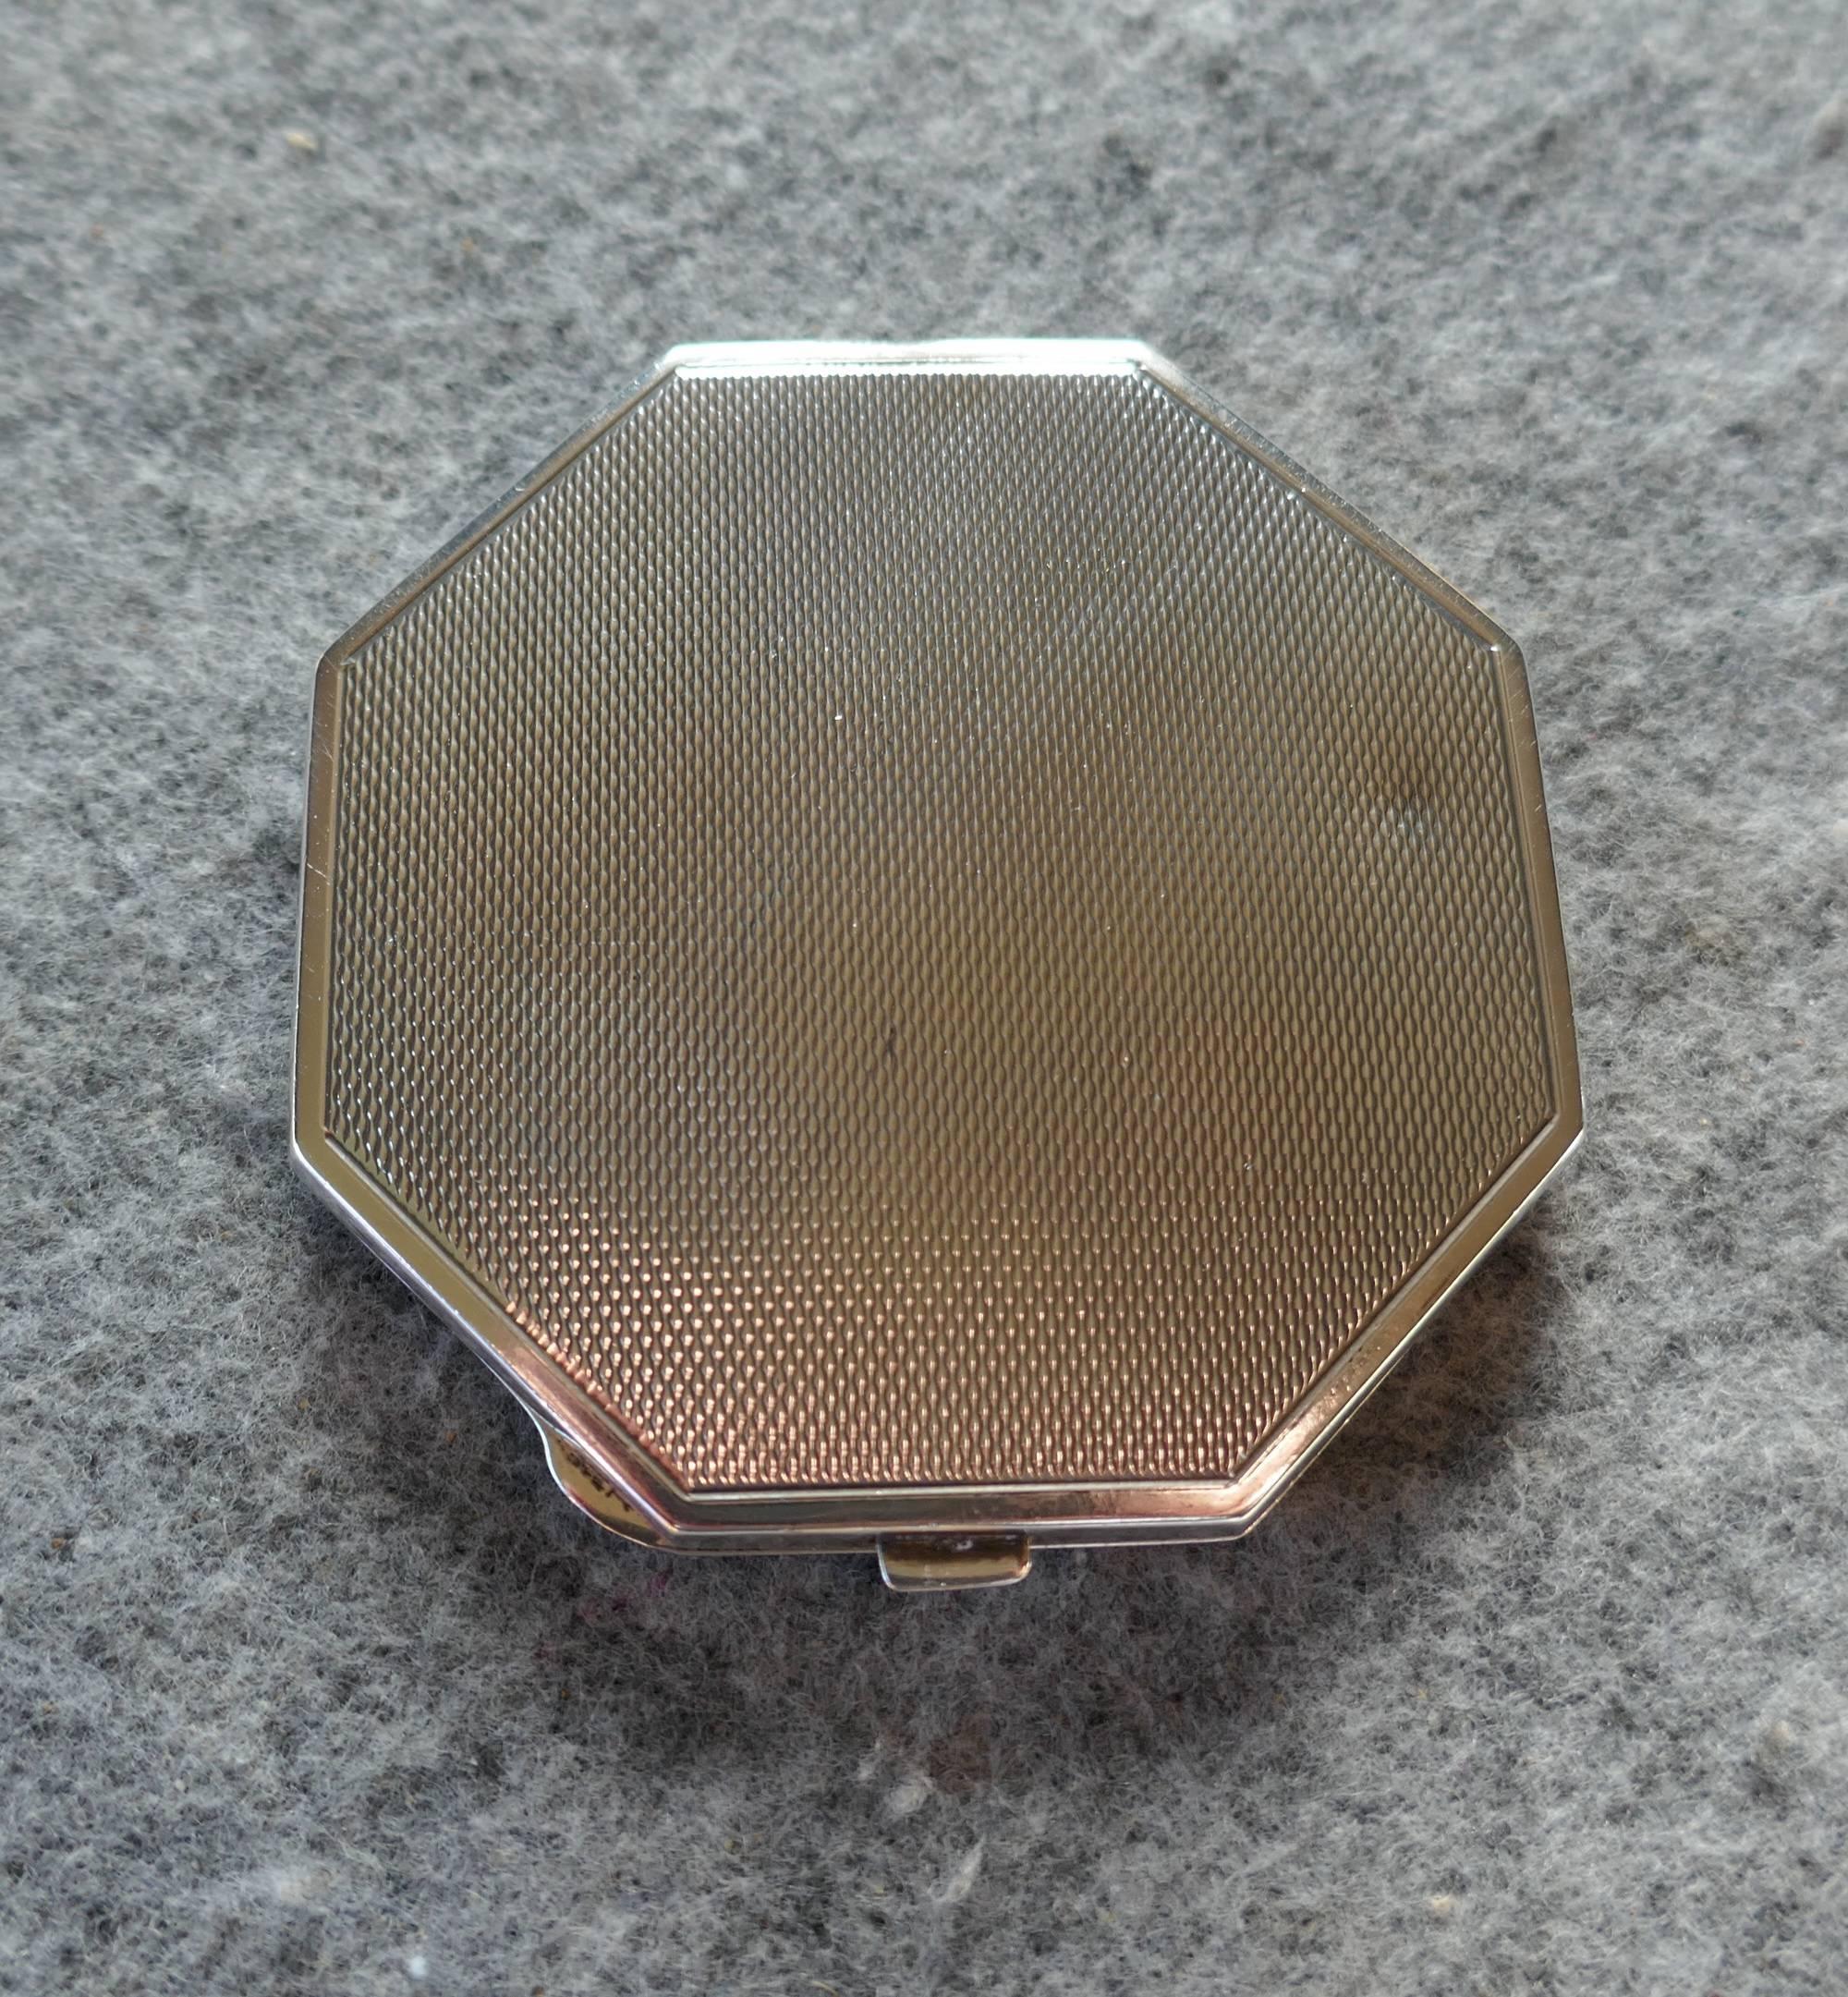 Pink sterling silver guilloche enamel Art Deco compact case 

This beautiful compact has an octagonal shape, the rose pink enamel radiates like sun burst from the bottom with an additional enamel border around the edge
The compact is in excellent